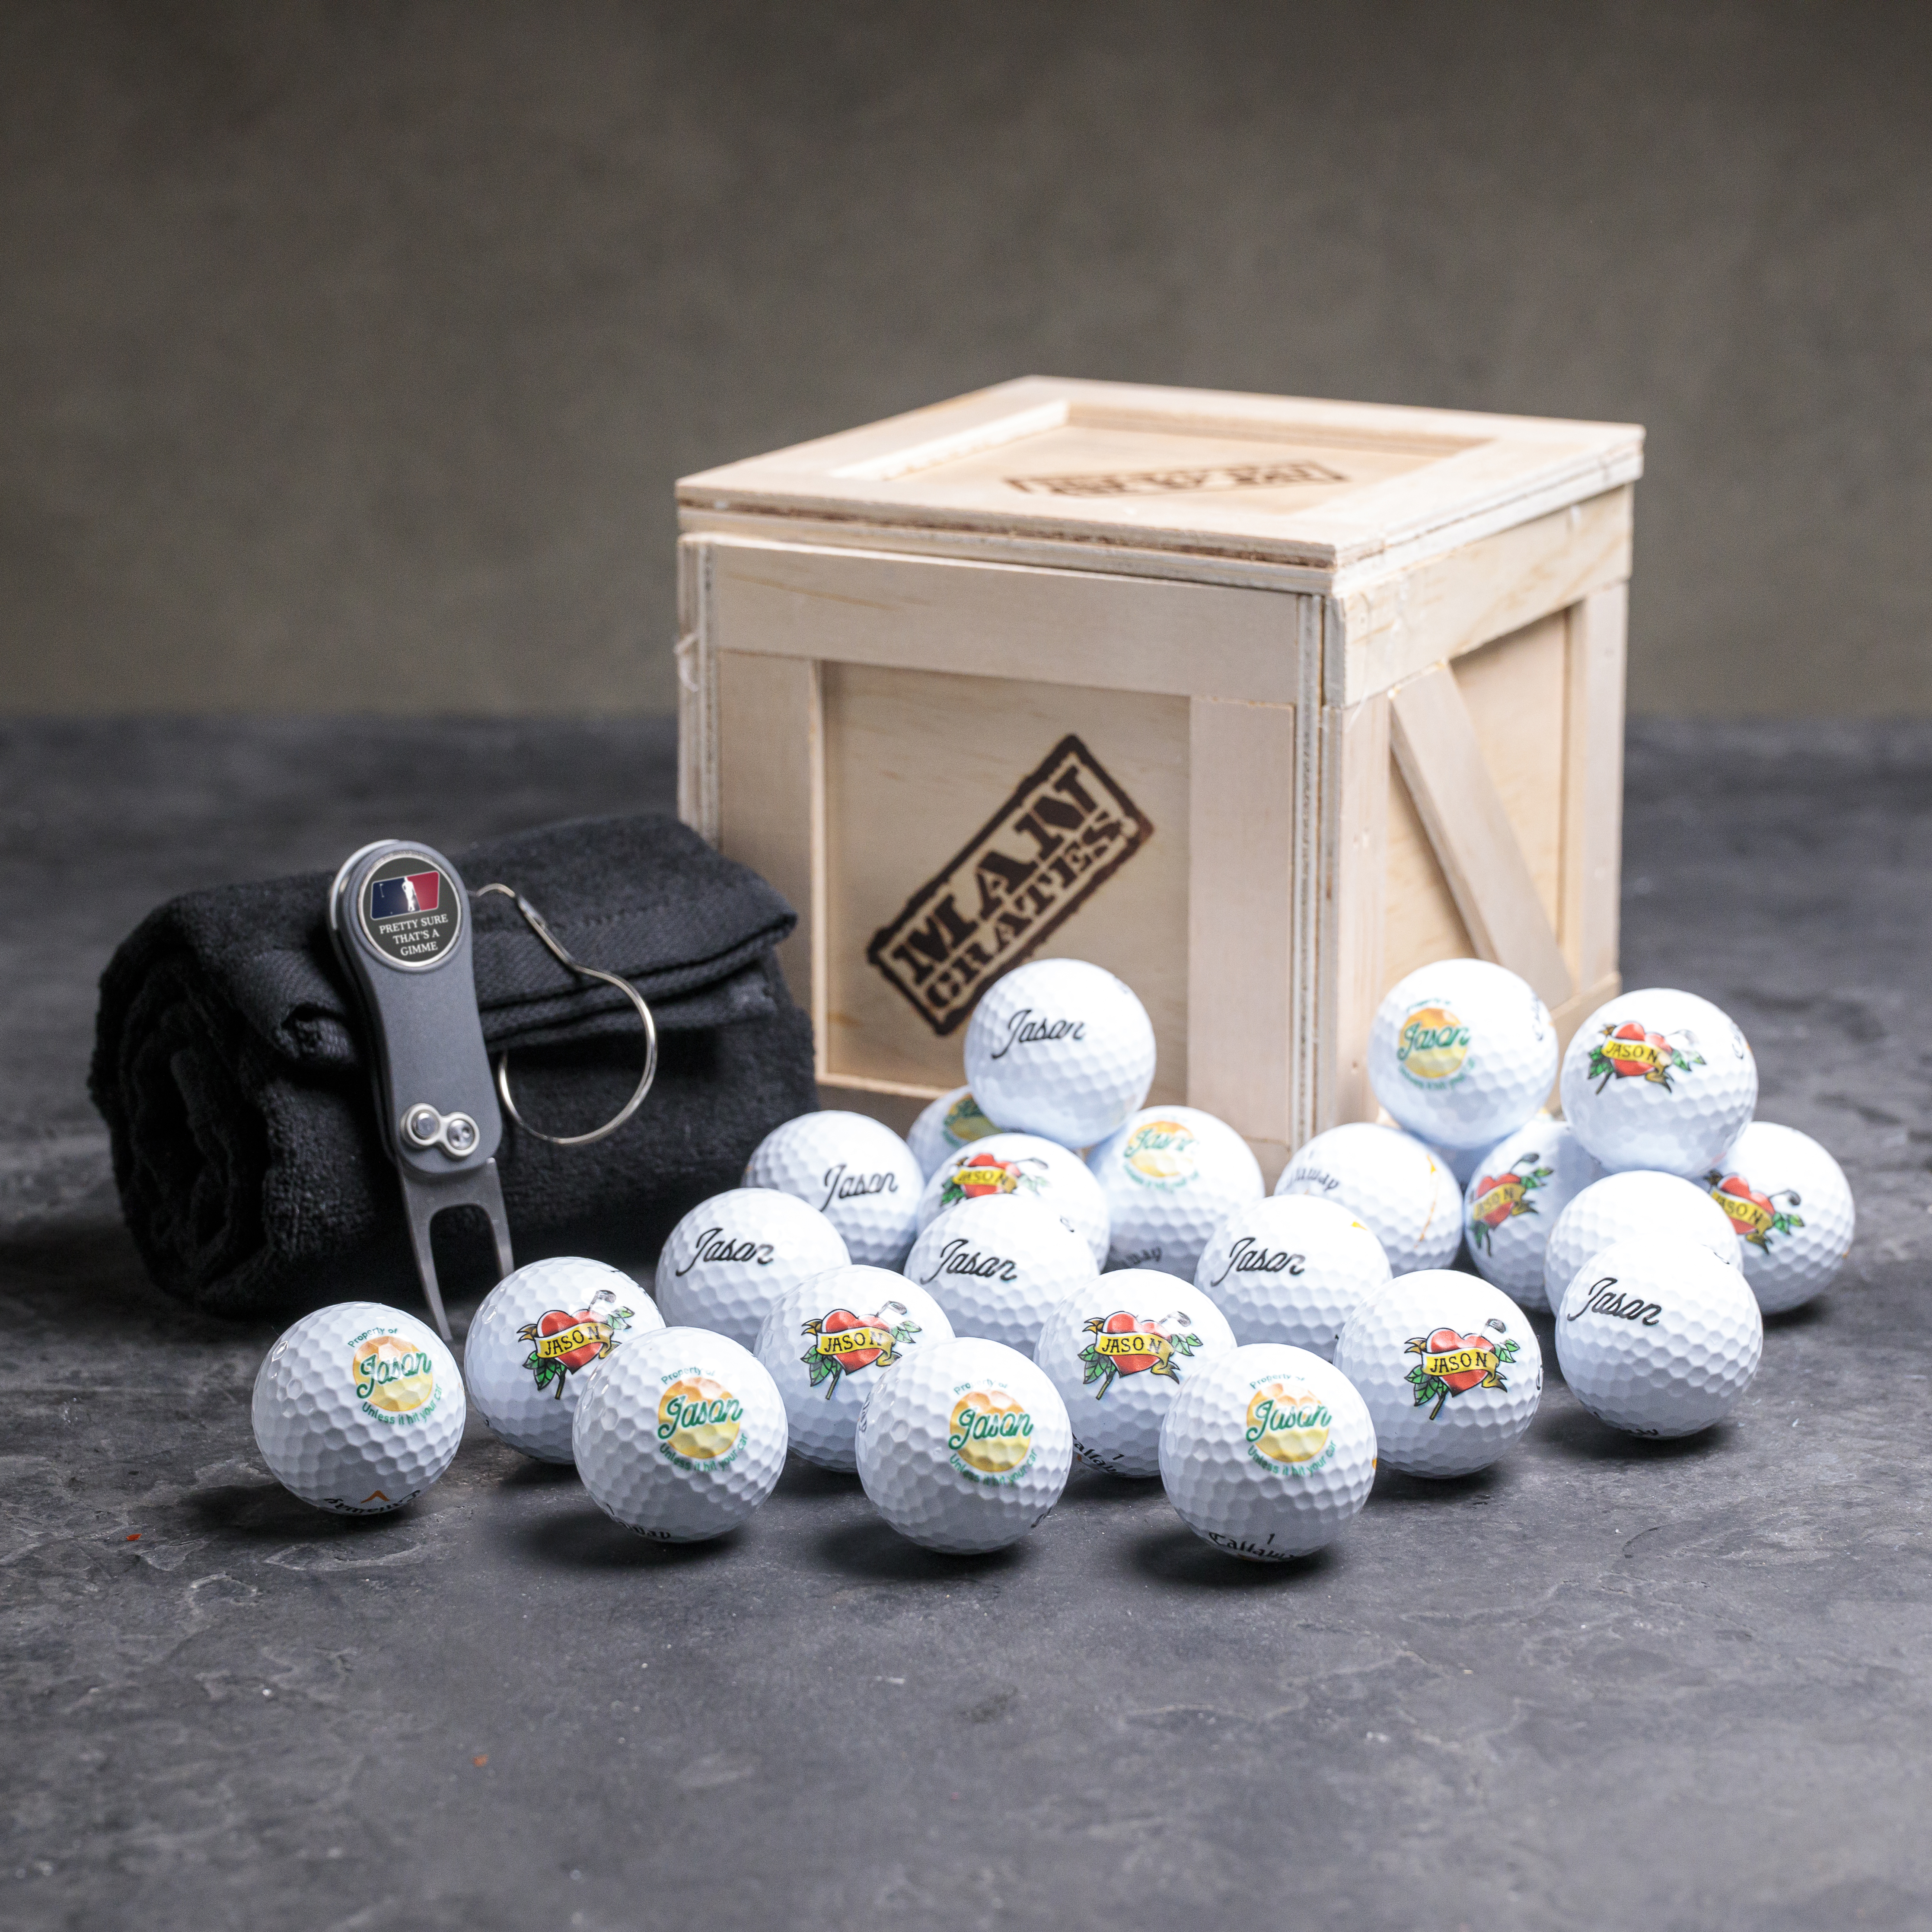 If you’re searching for a unique gift, the Personalized Golf Balls Mini Crate is sure to be . . . a hole in one!